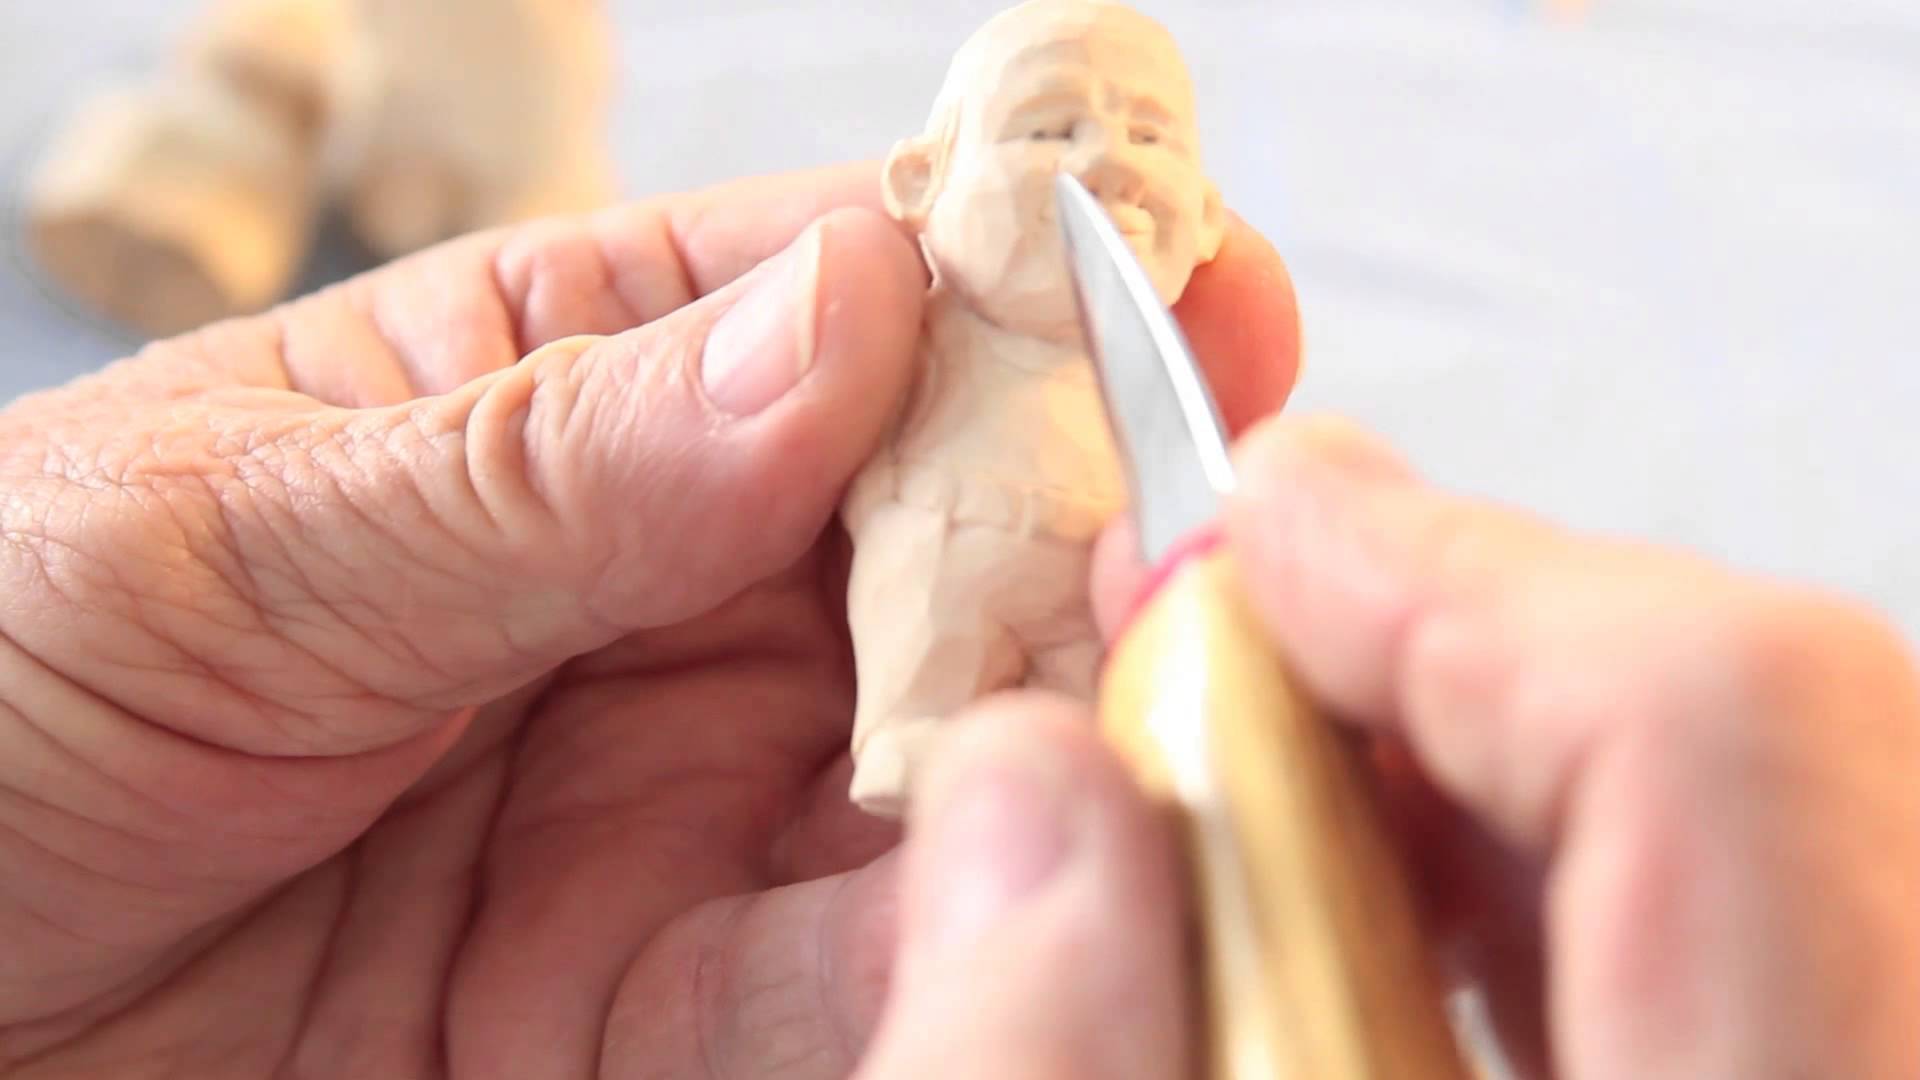 Guide to Wood Carving Faces Part 2 - YouTube